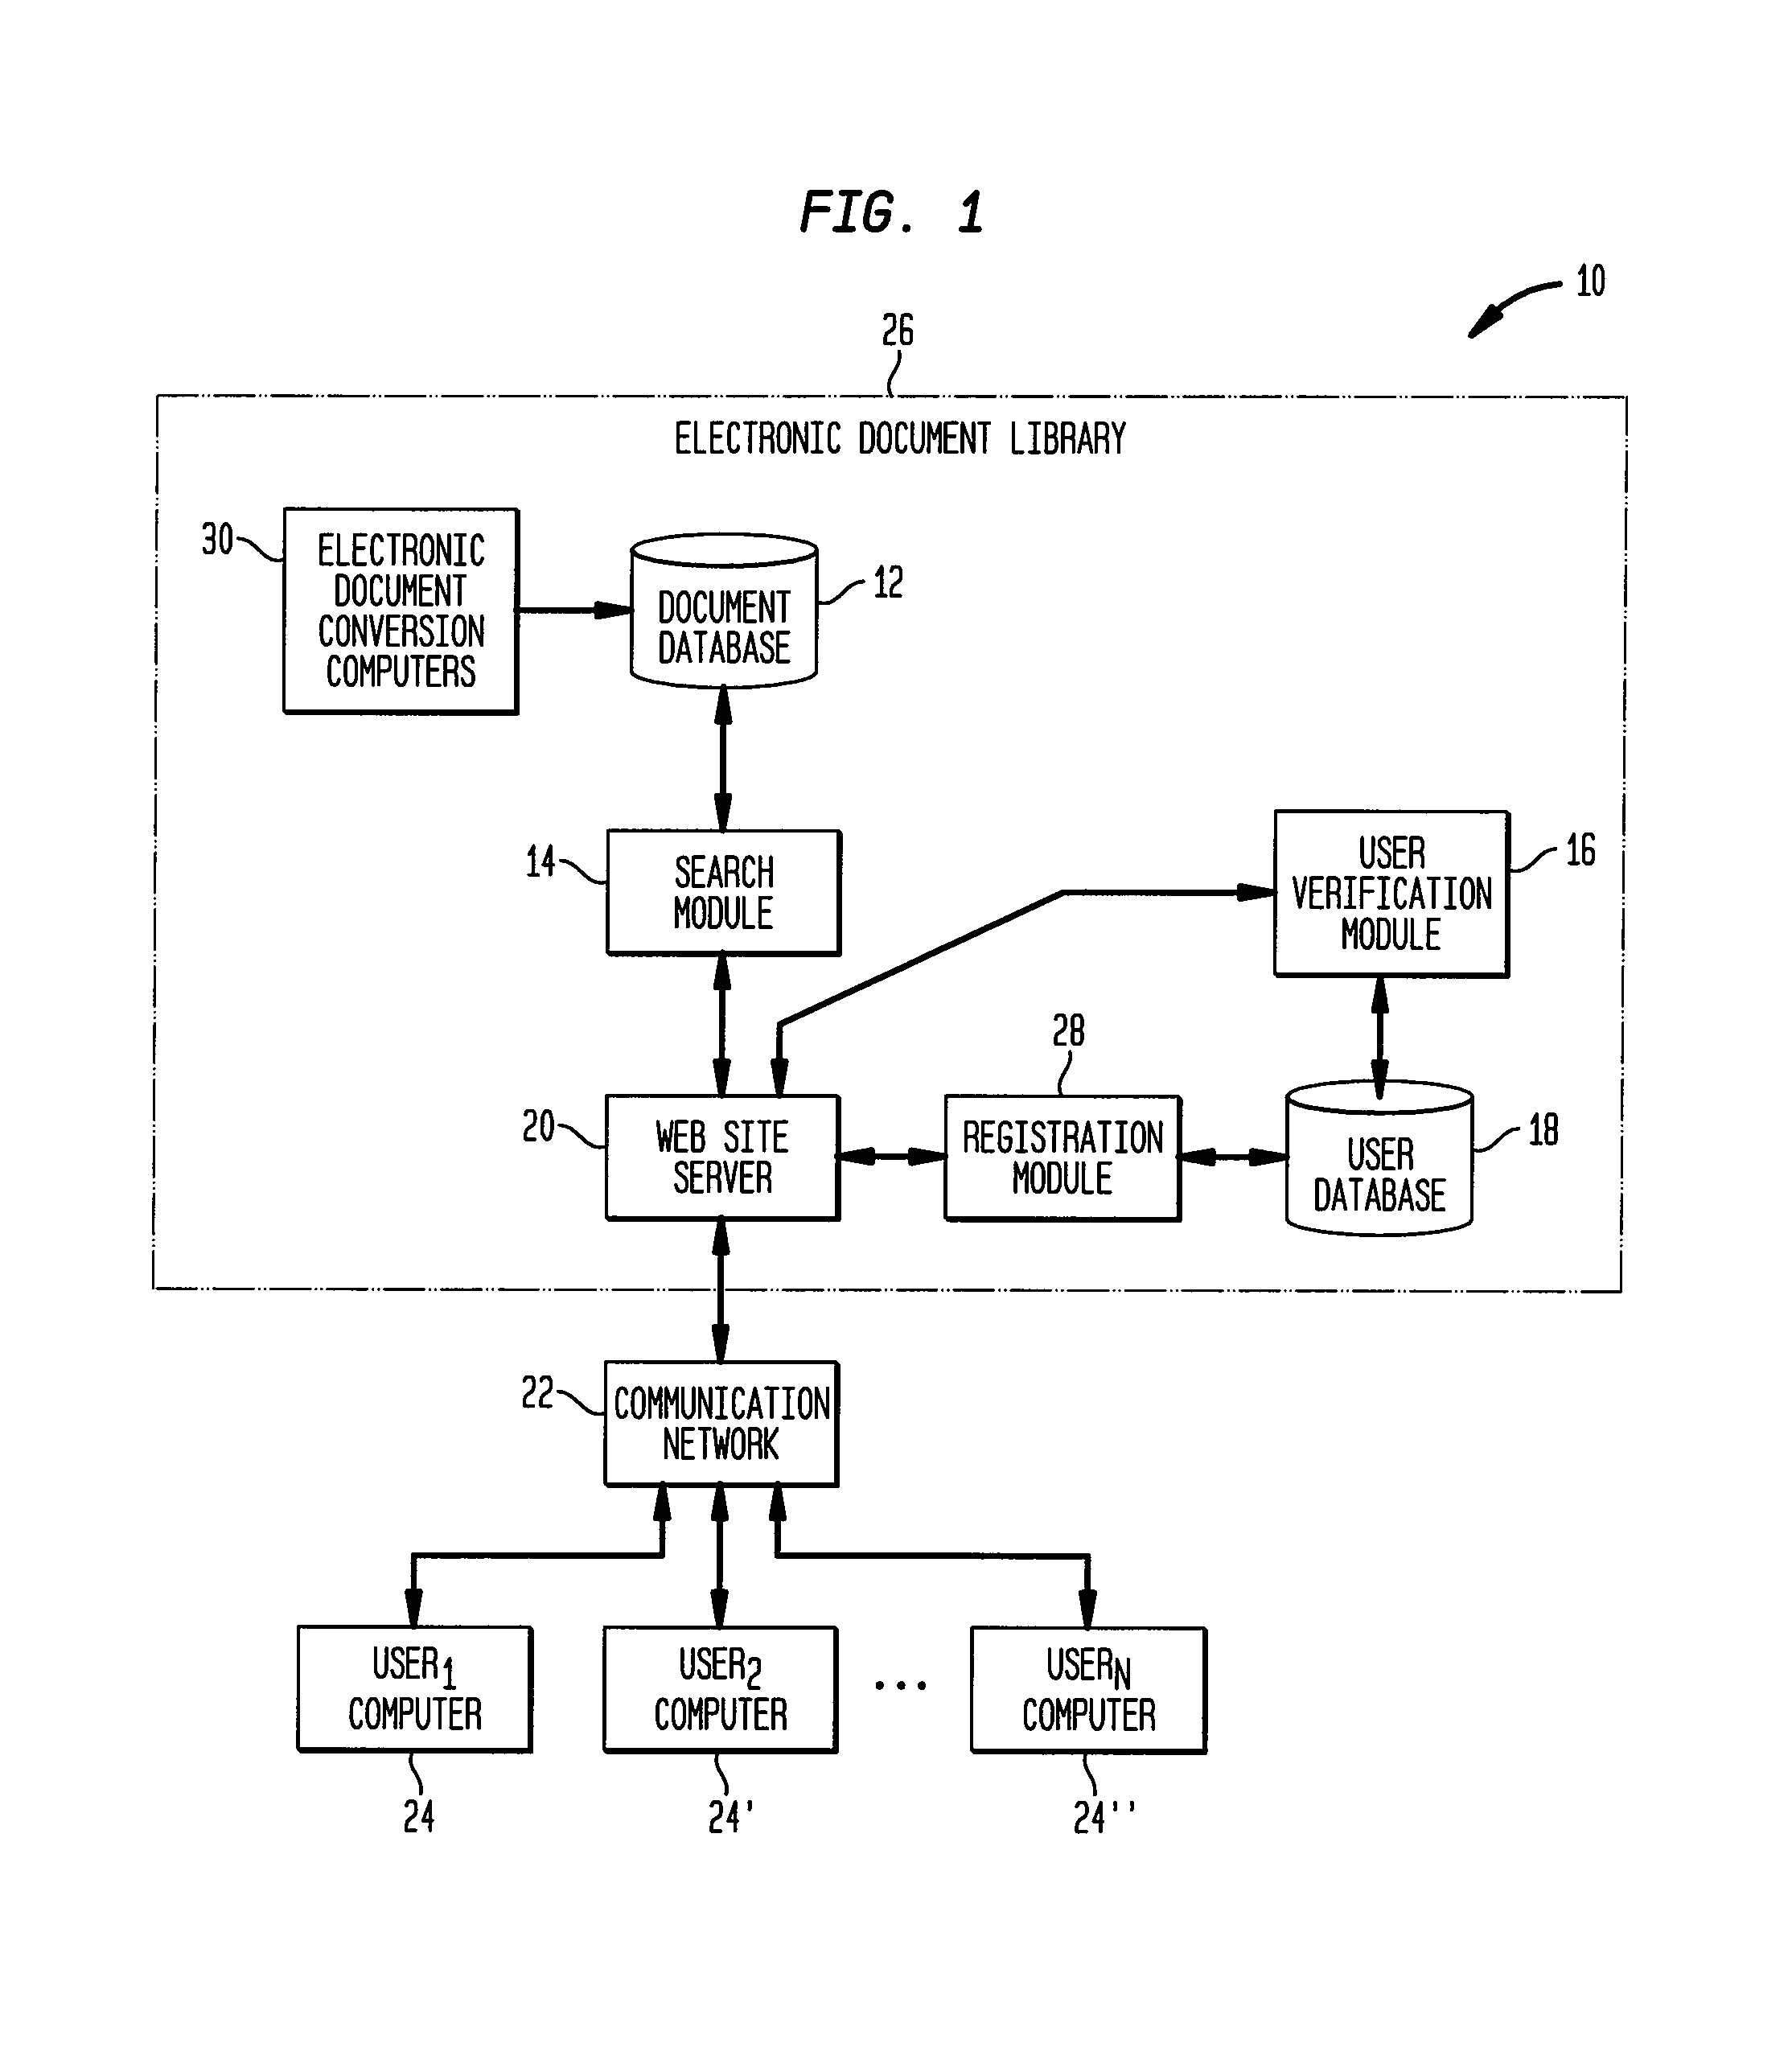 System and method for providing a searchable library of electronic documents to a user